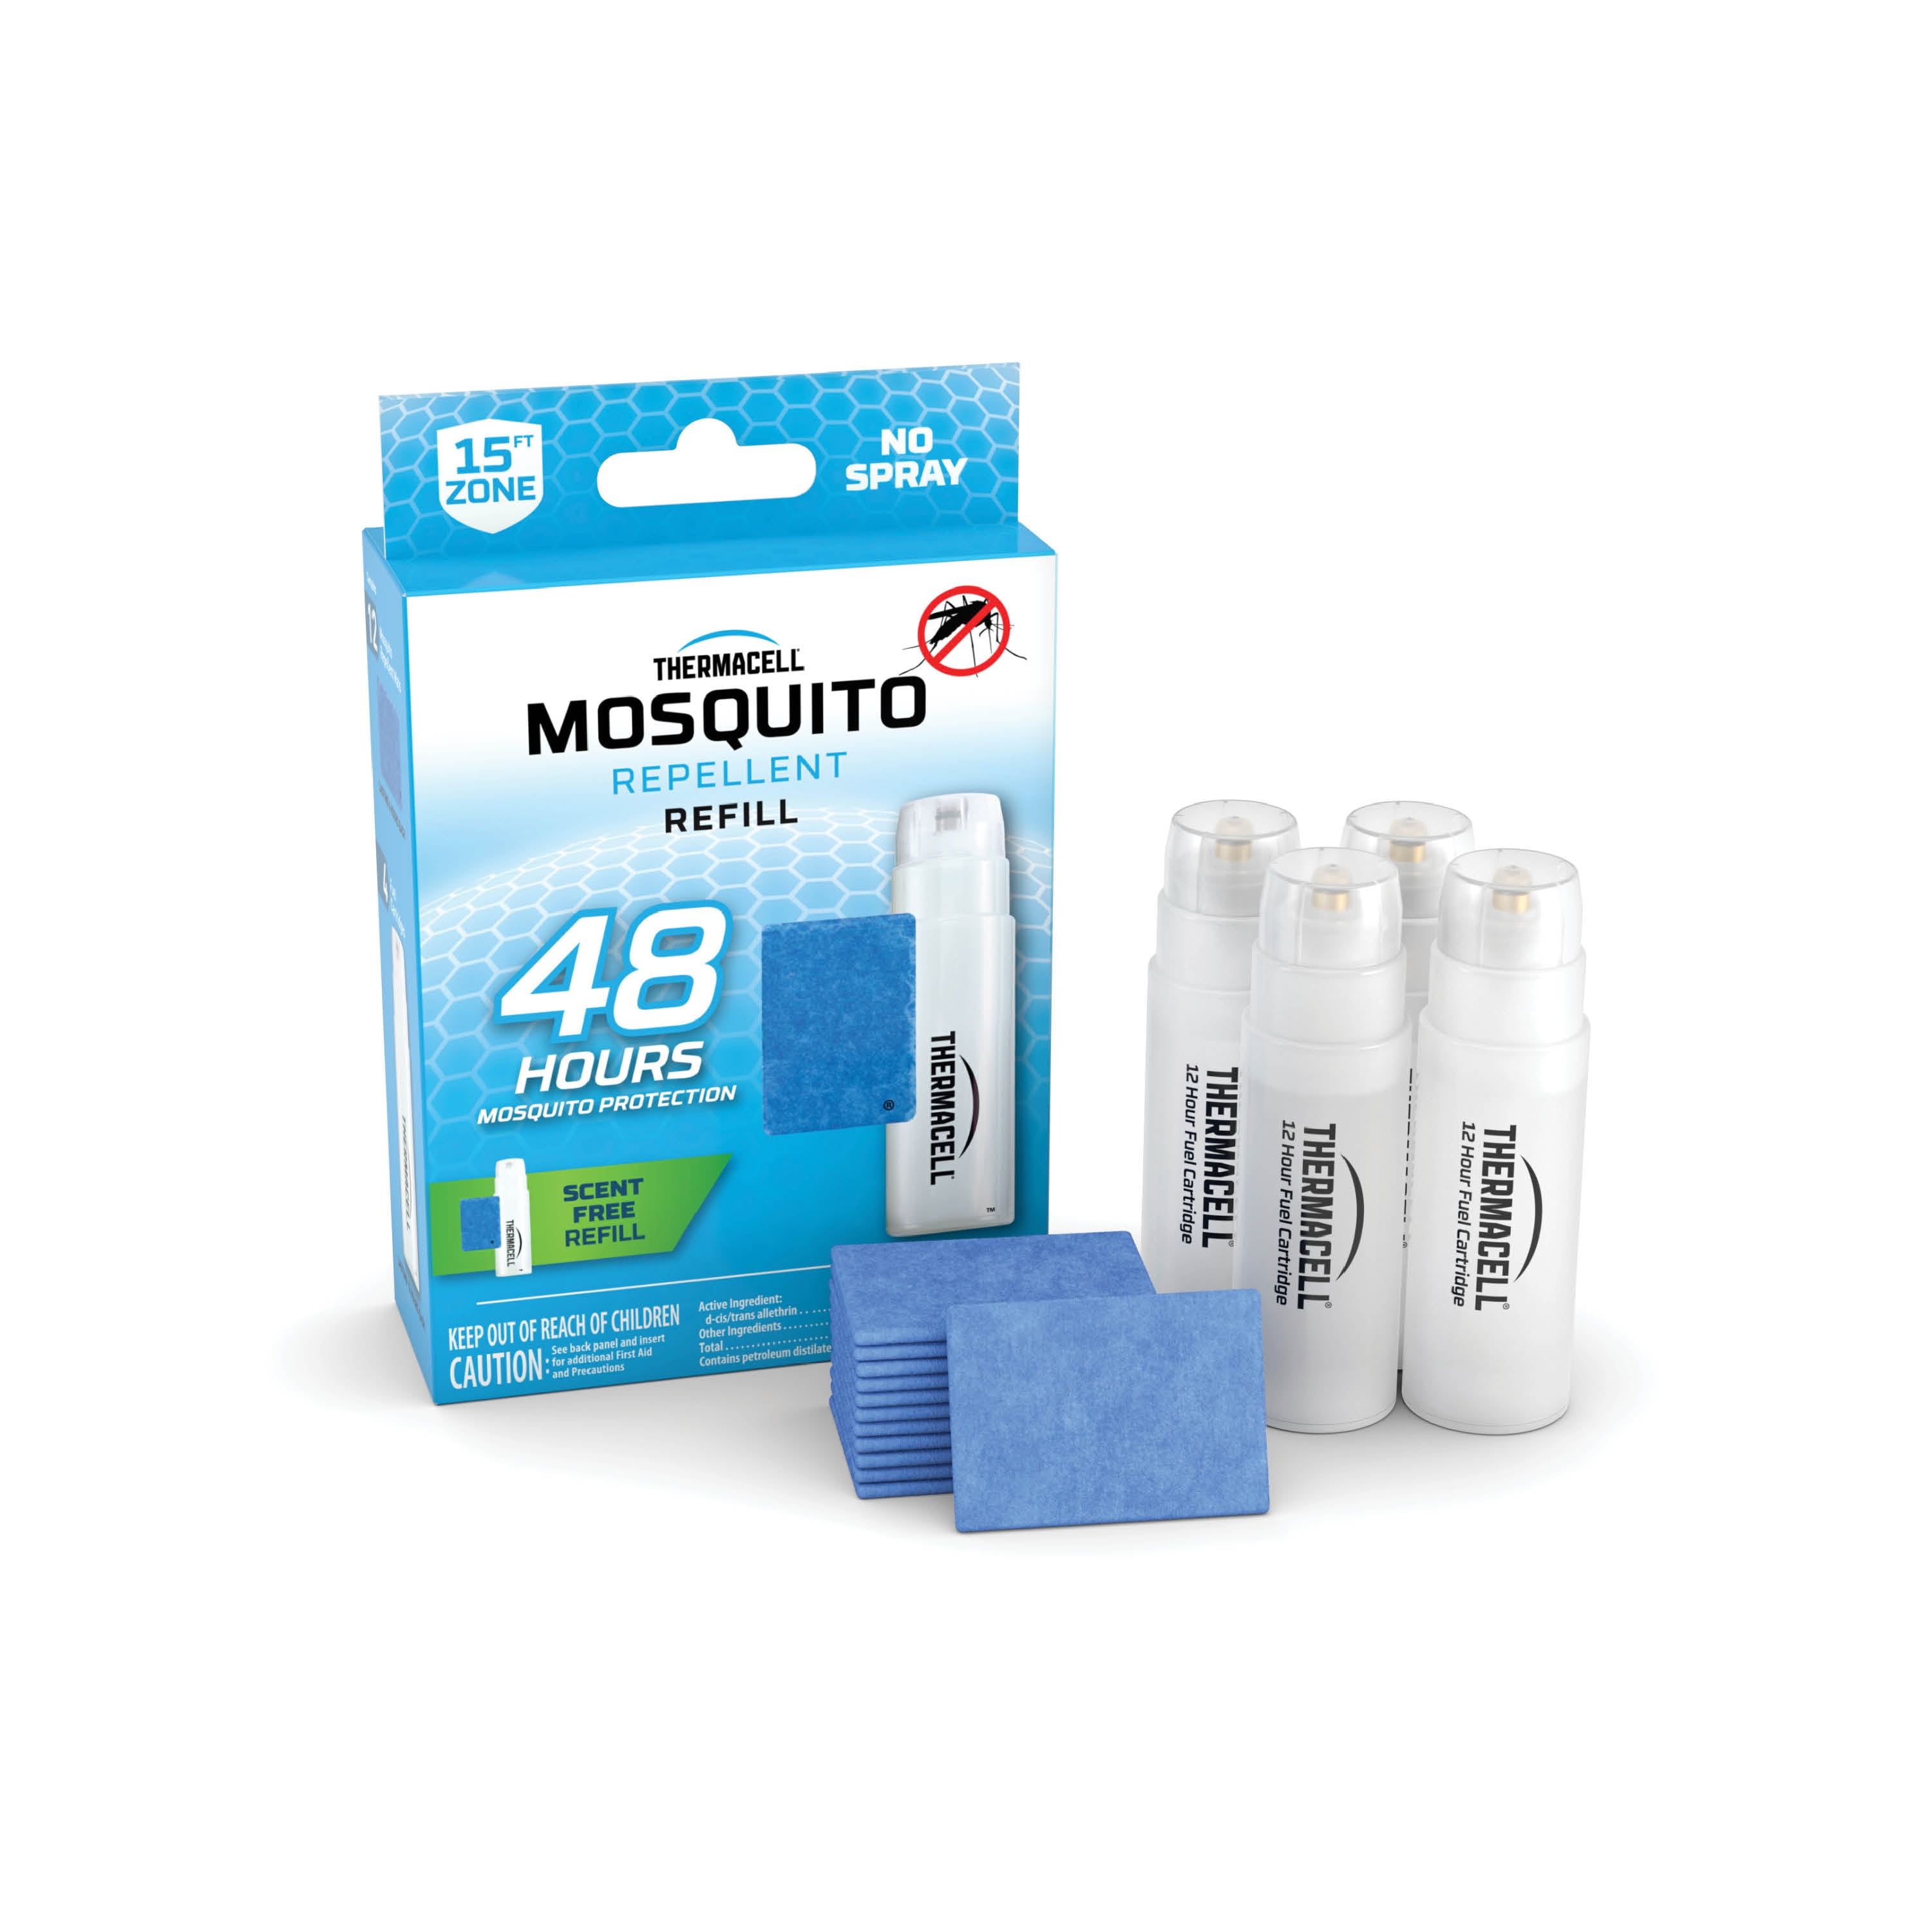 Thermacell Mosquito Repellent Refills with 48-Hour Mosquito Protection, 4 Pack